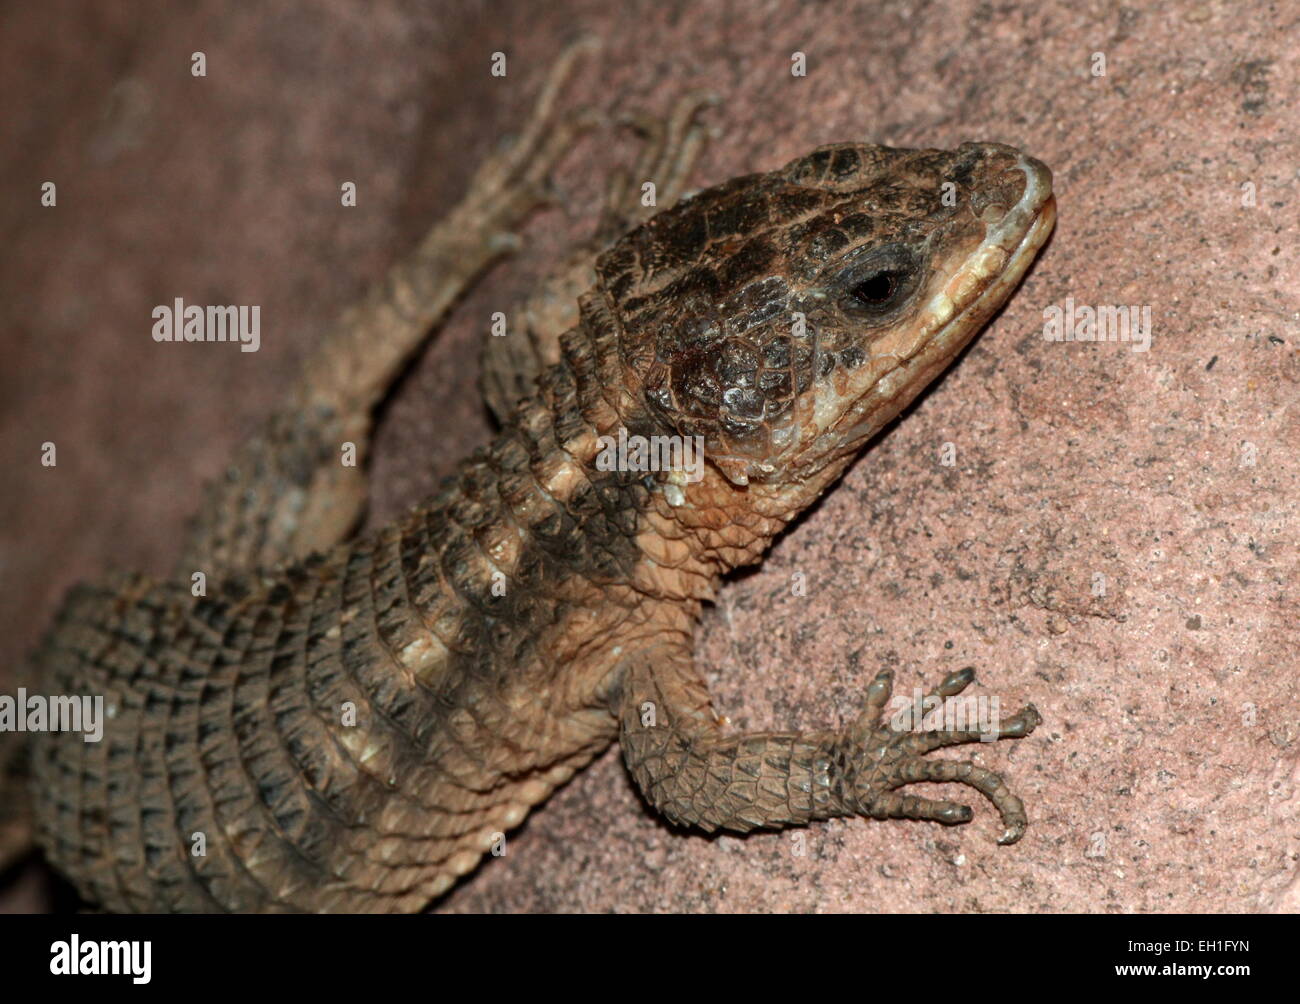 East African spiny-tailed lizard (Cordylus tropidosternum), head and claws, posing on a rock Stock Photo